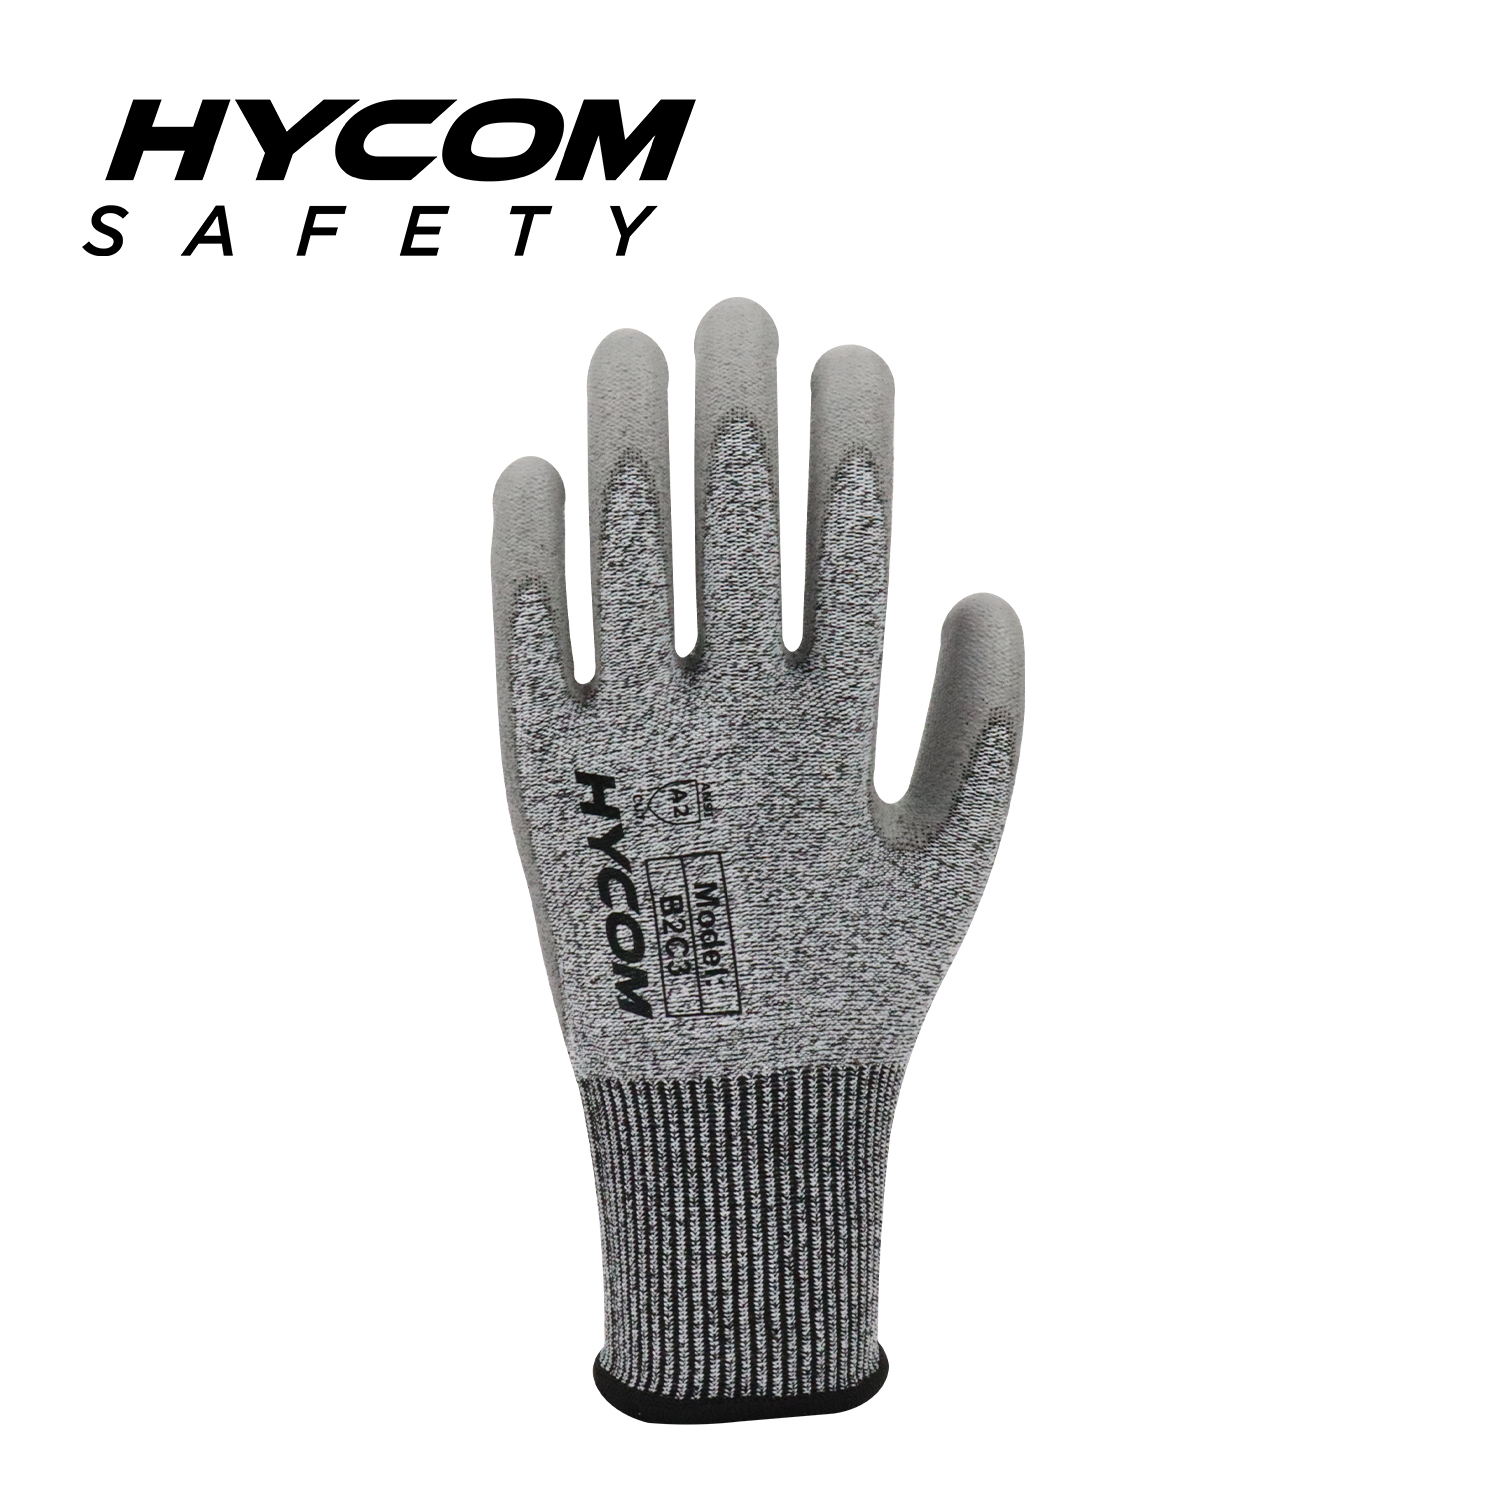 HYCOM 13G ANSI 2 Cut level 3 Cut Resistant Glove with Palm Polyurethane Coating PPE Gloves